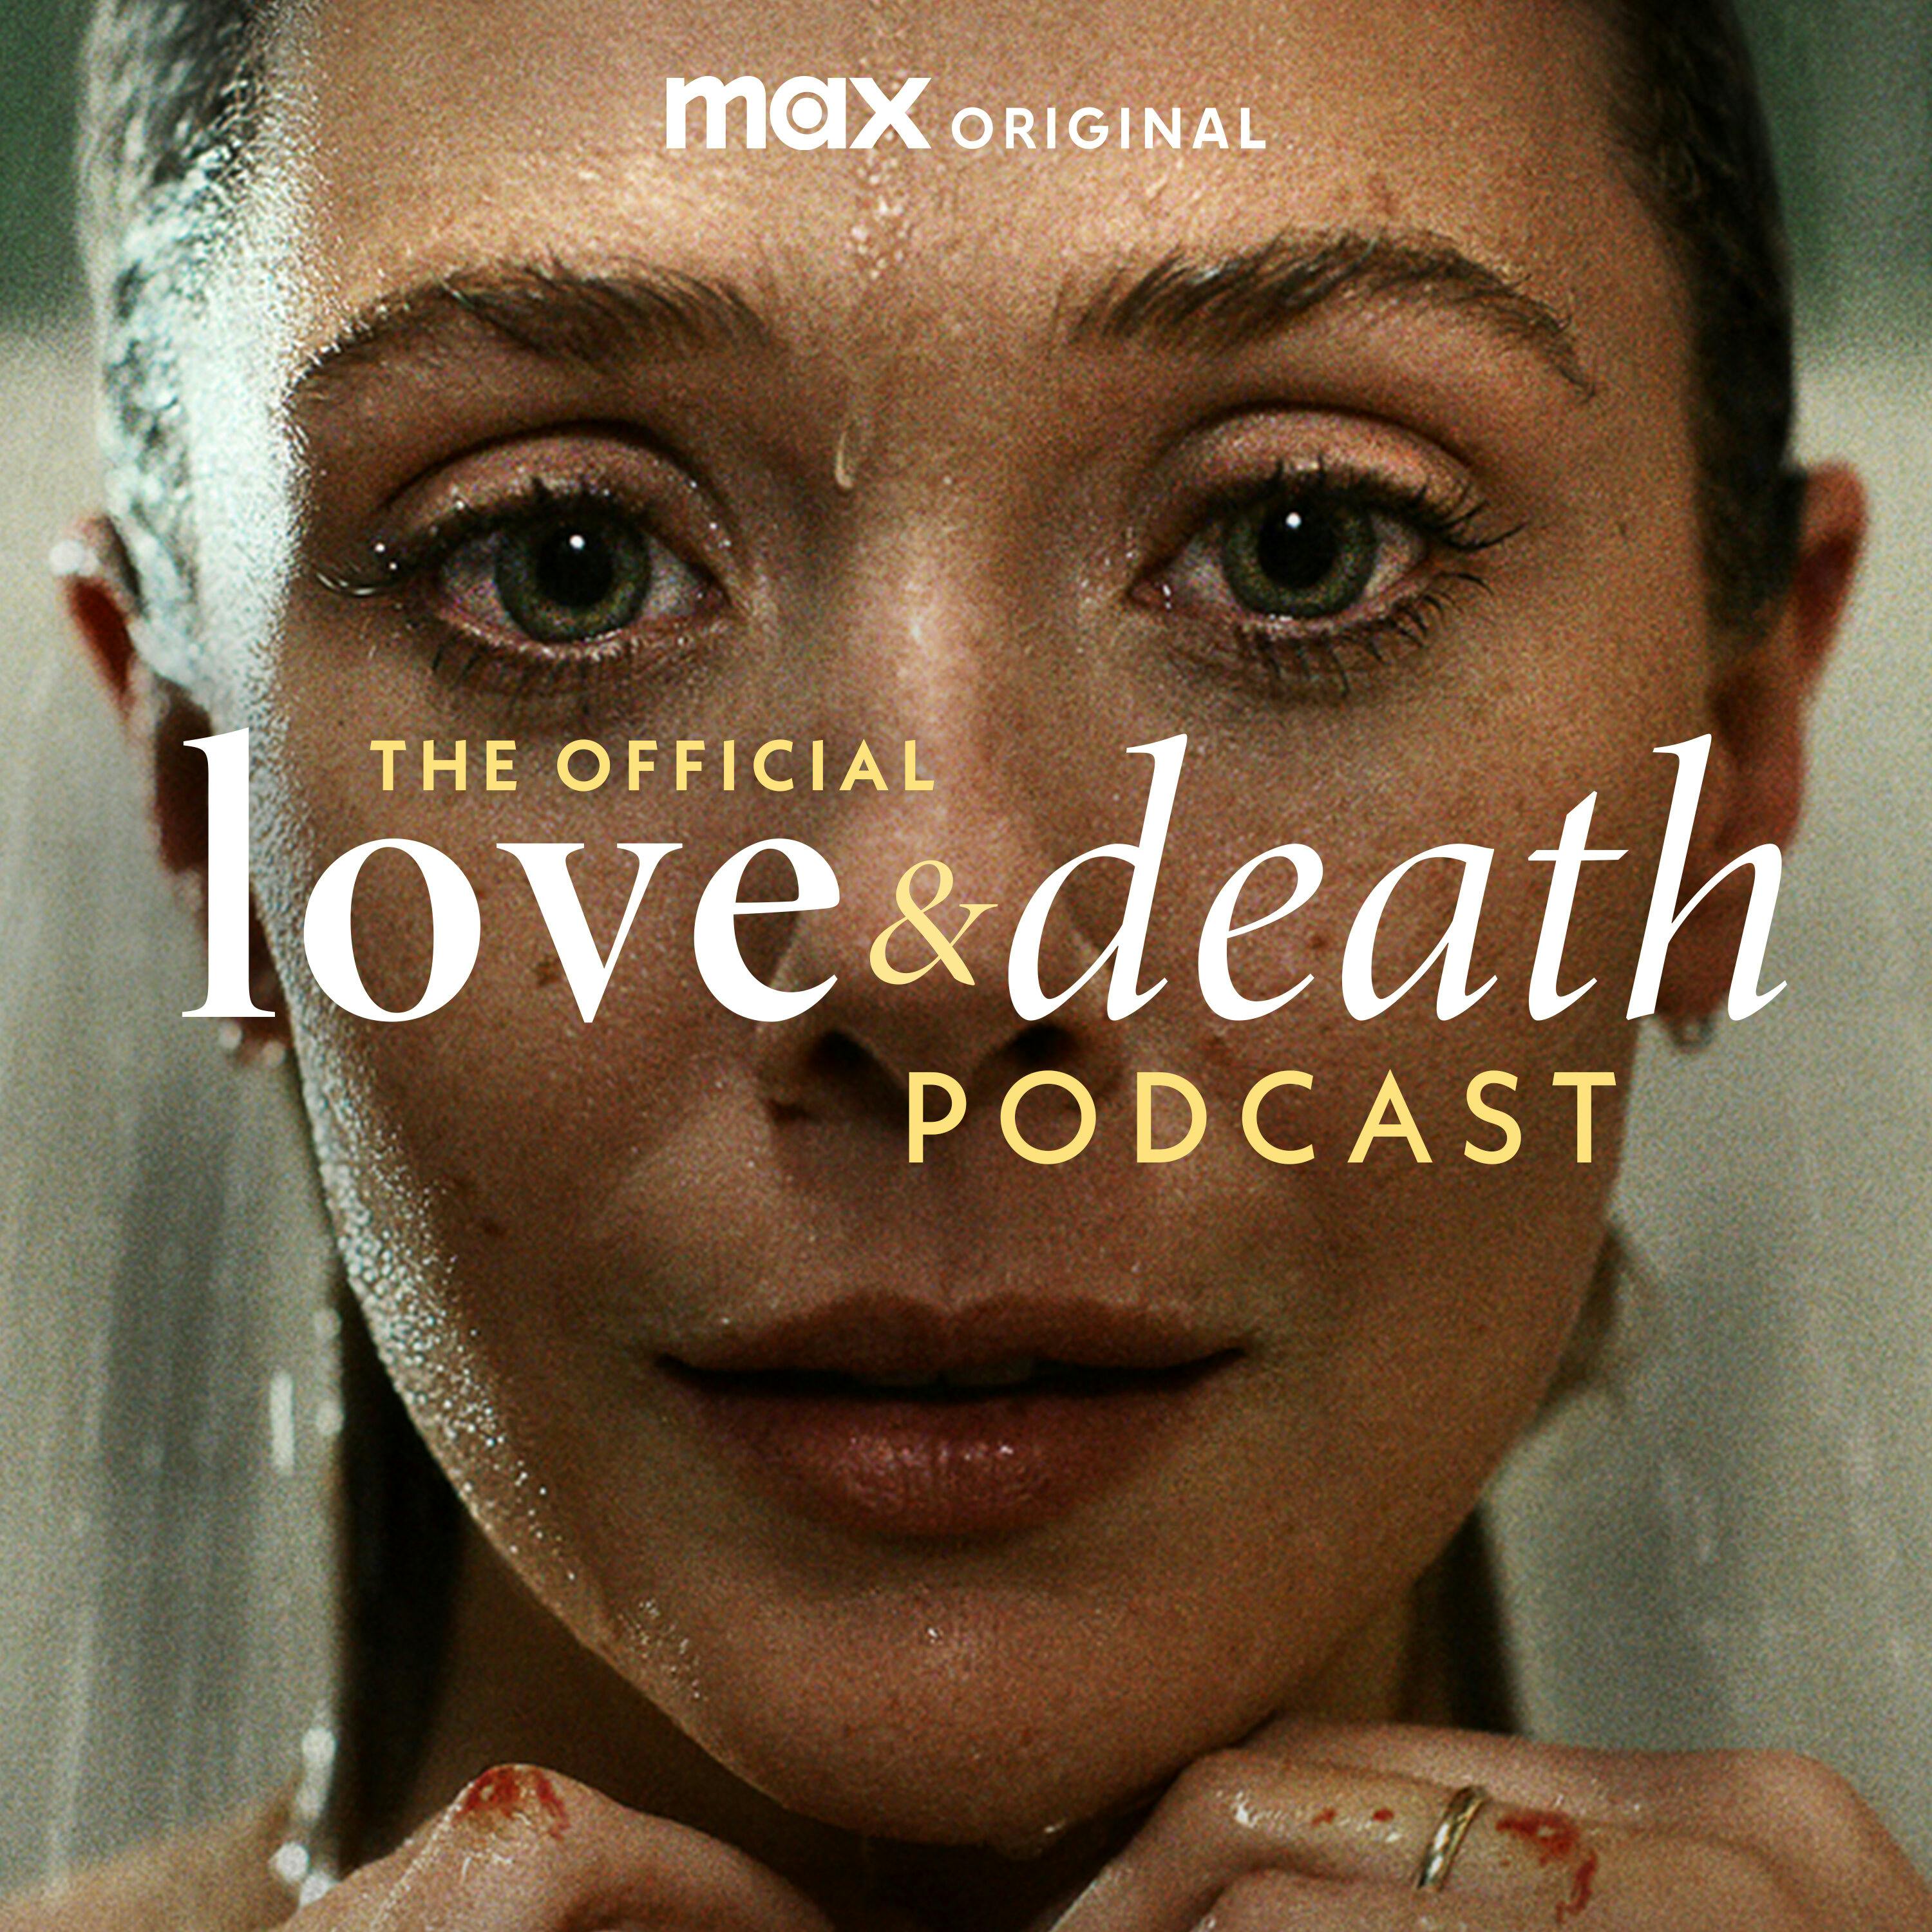 The Official Love & Death Podcast Trailer